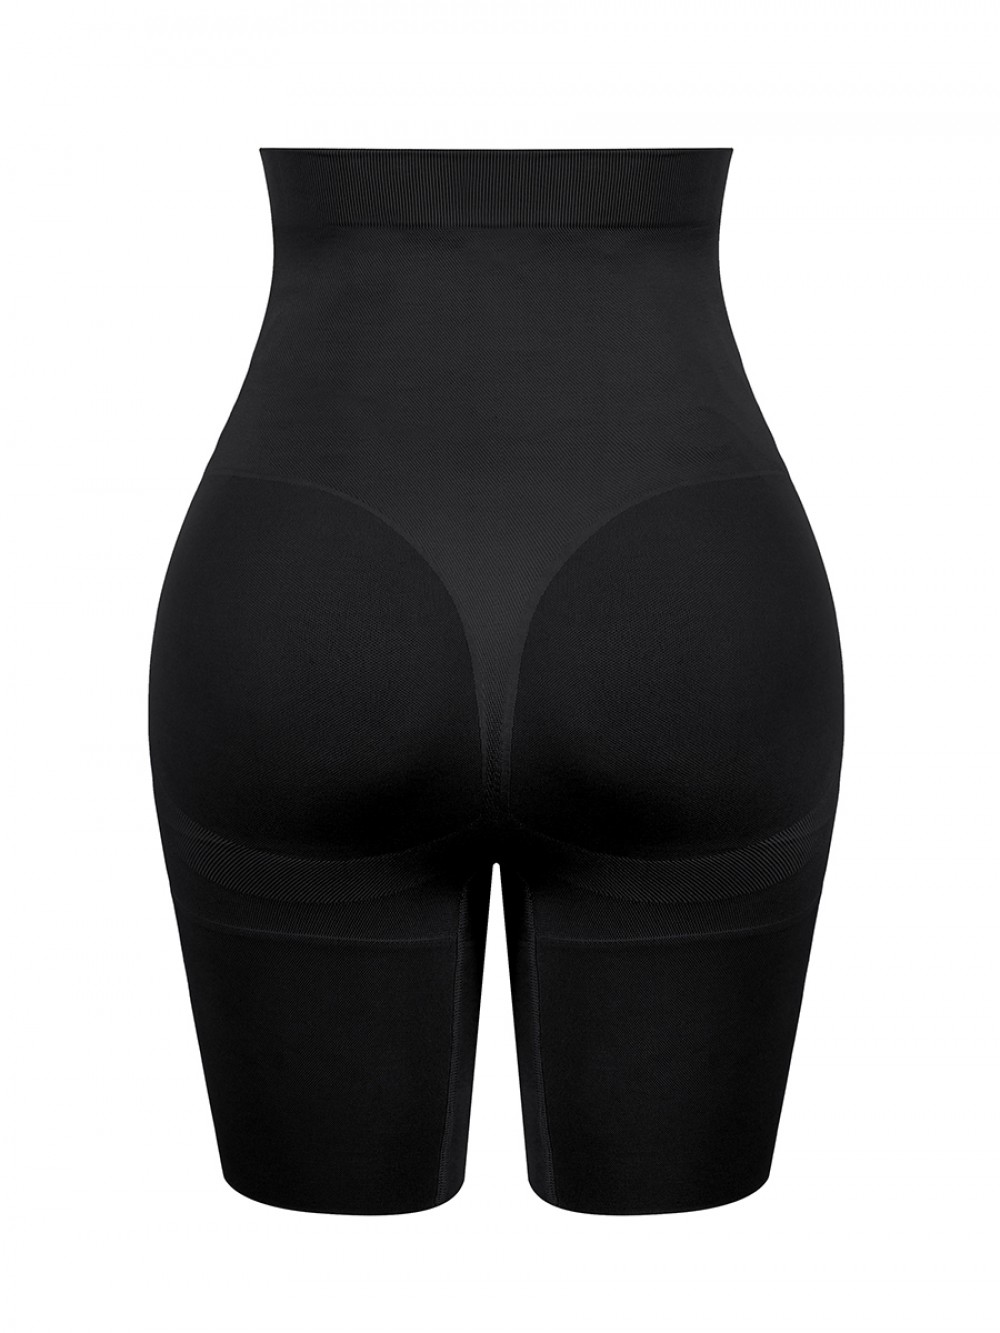 Black Seamless Solid Color Maternity Panty Buckle Firm Foundations